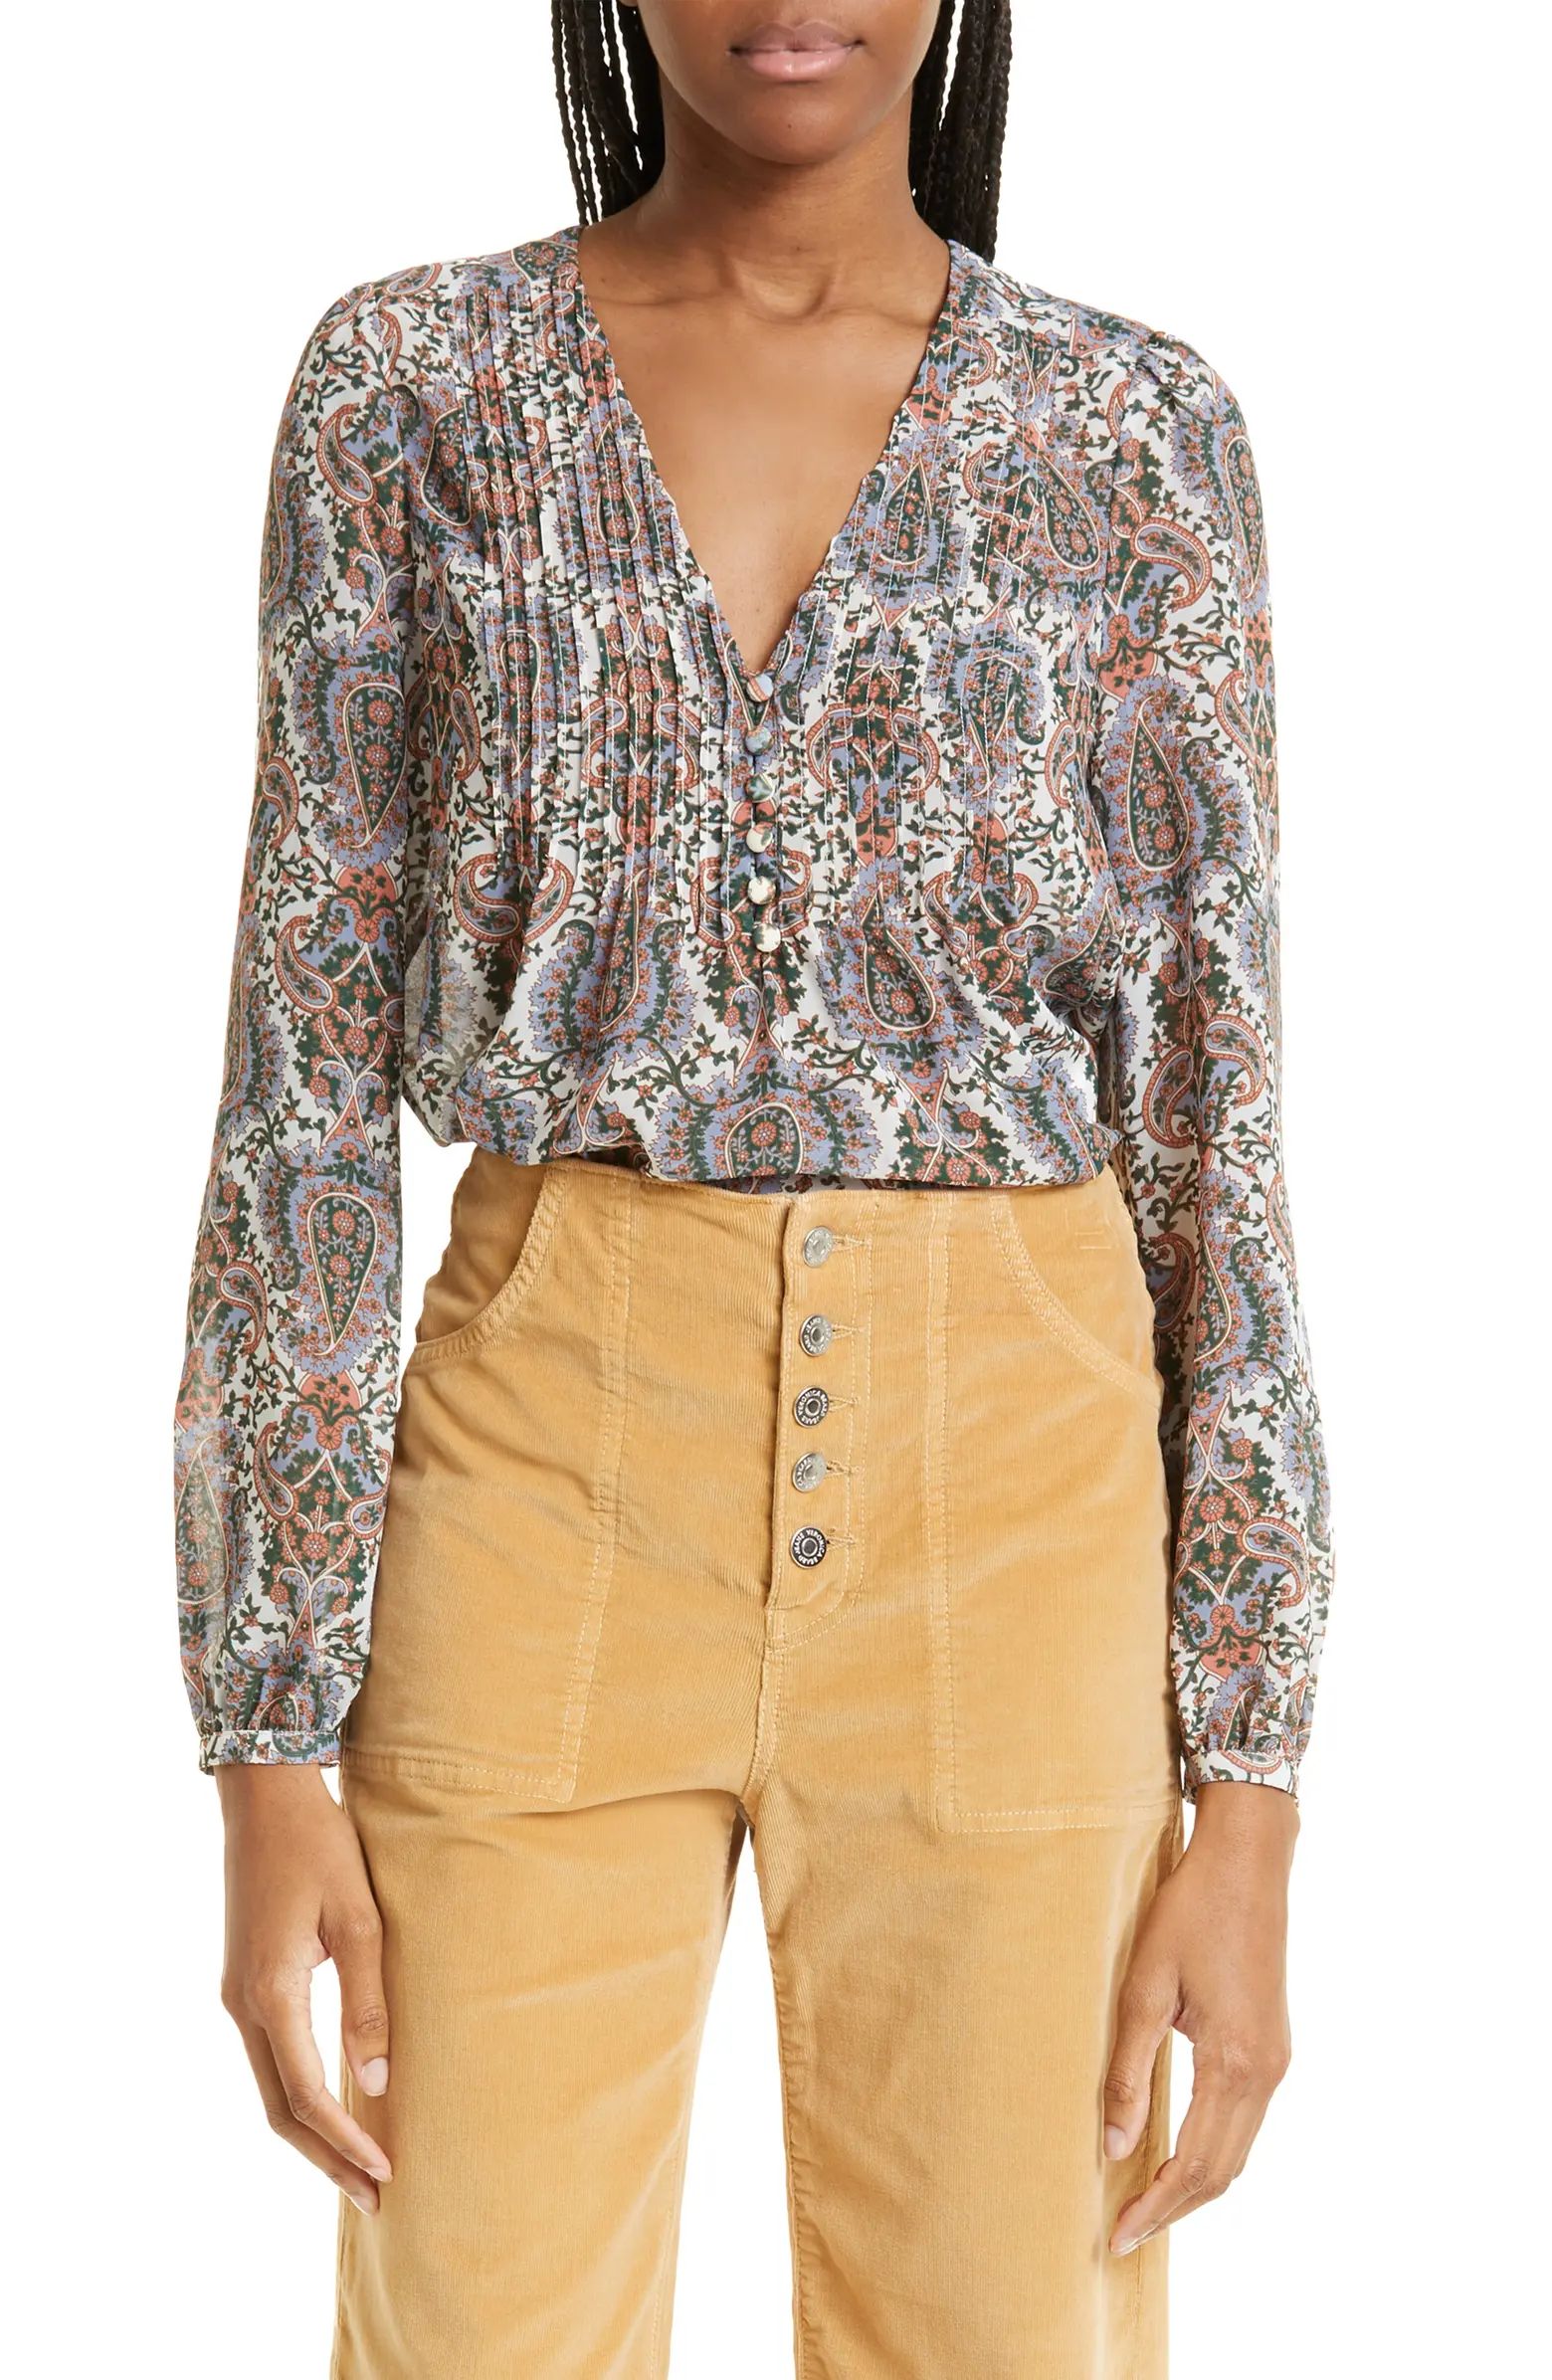 Lowell Paisley Top | Nordstrom